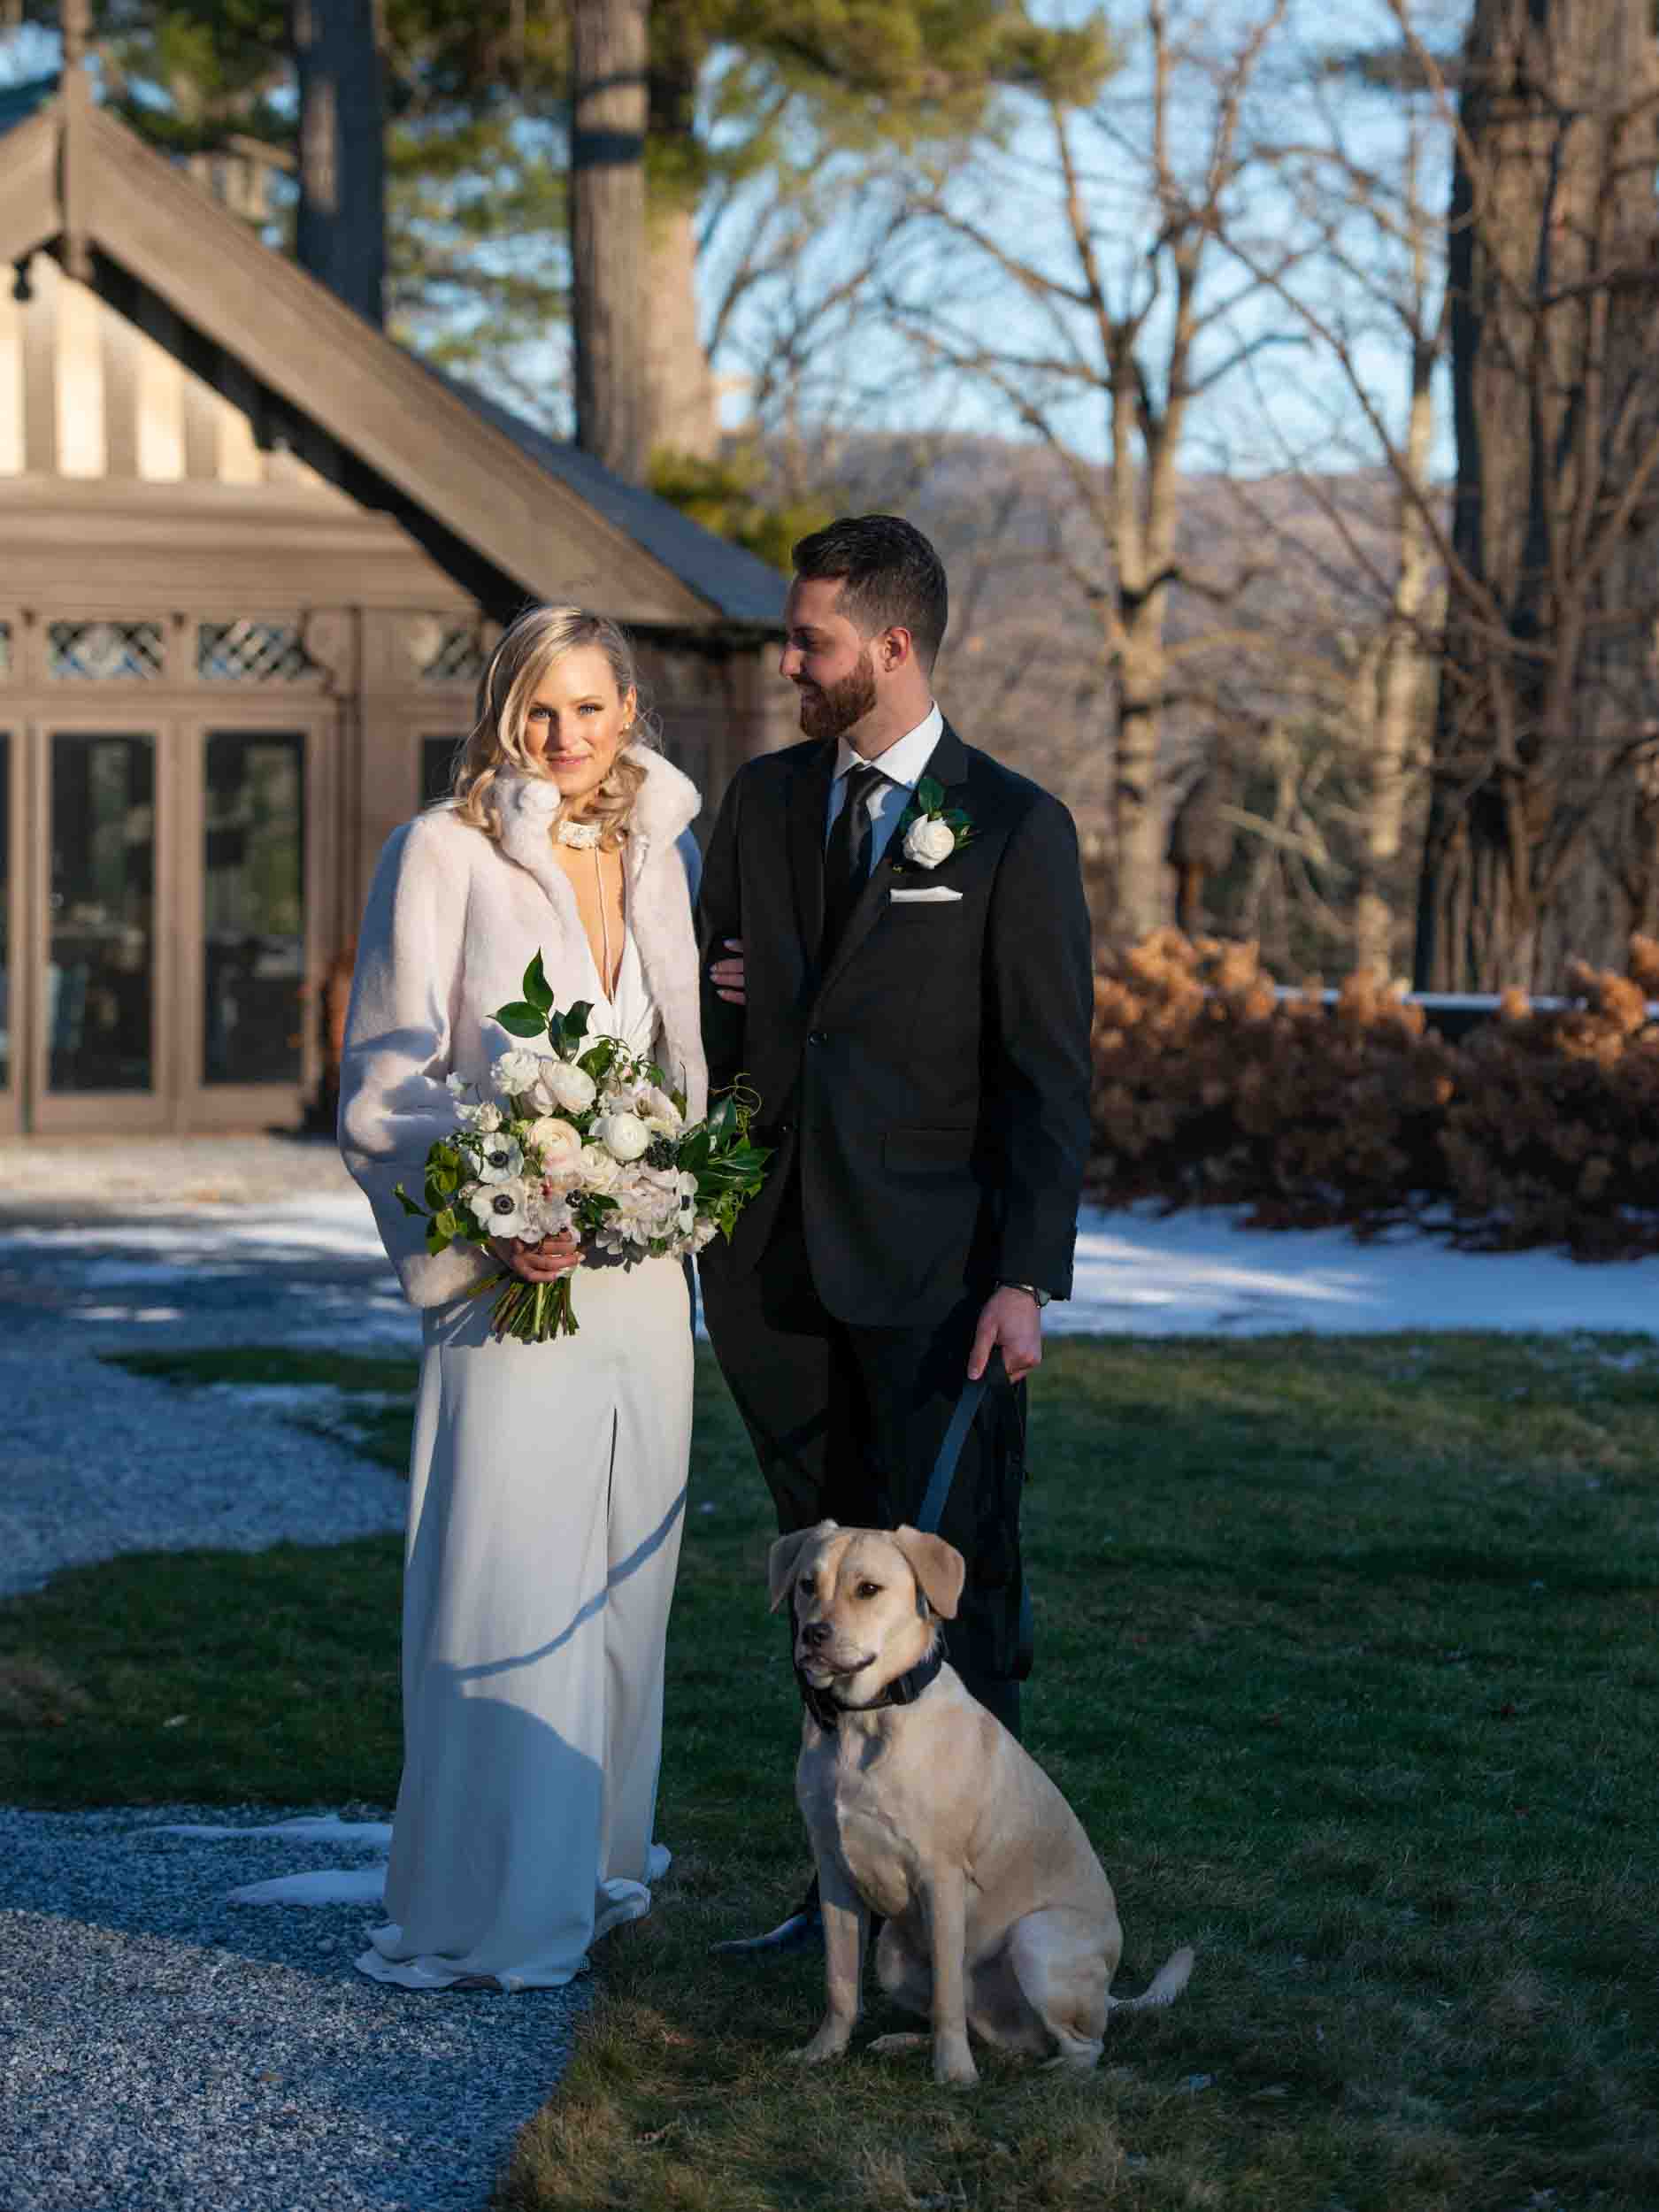 Bride and groom winter wedding portraits at golden hour with puppy